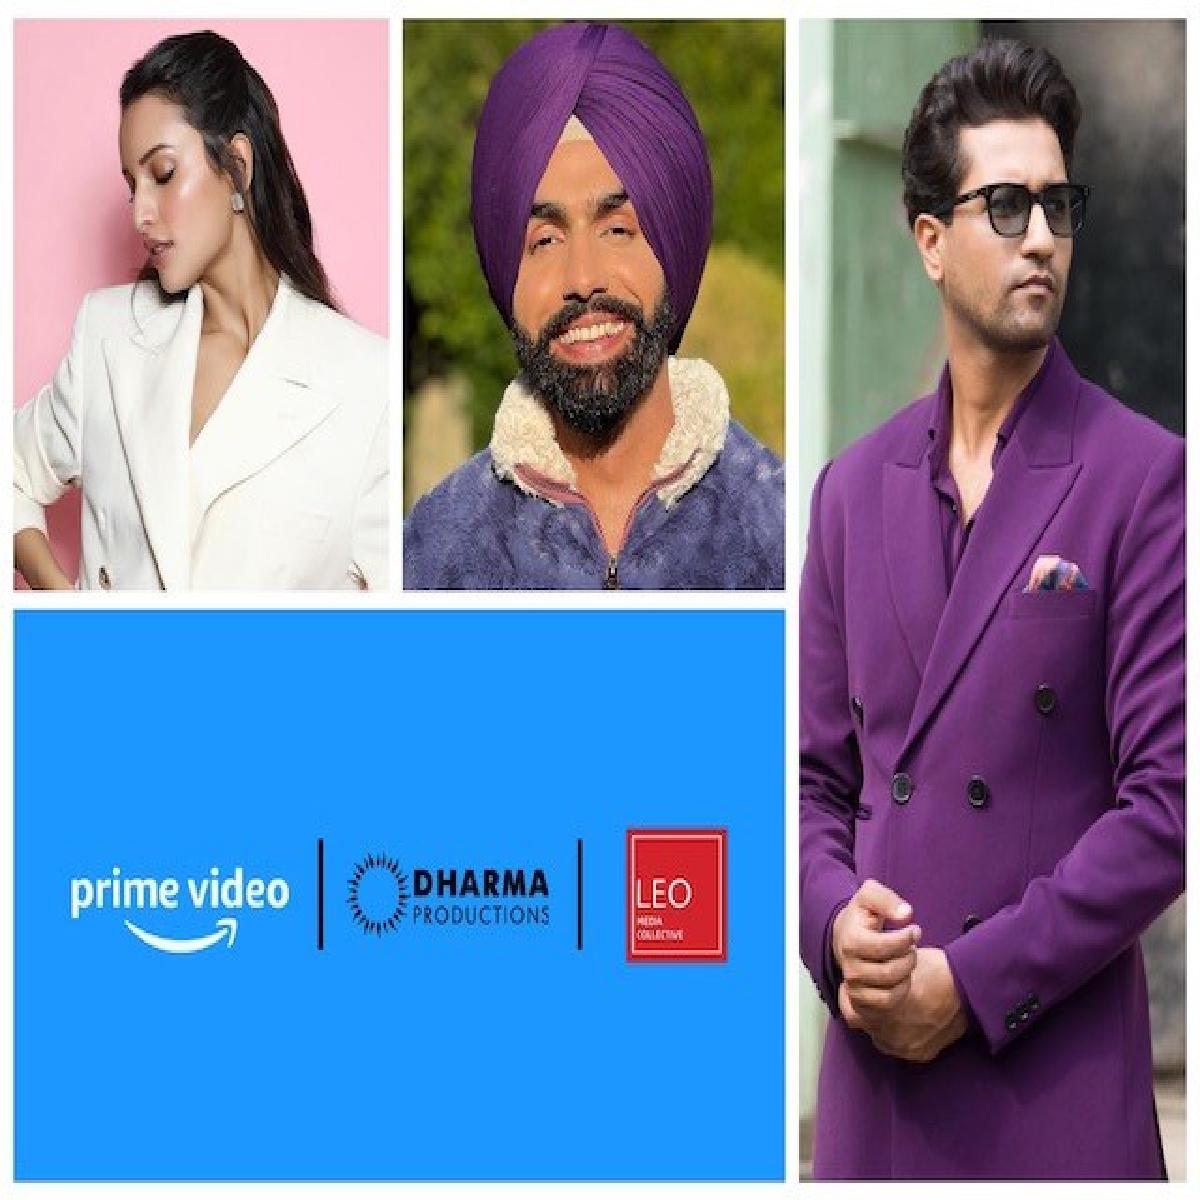 Vicky Kaushal, Tripti Dimri And Ammy Virk In Dharma And Prime Video’s Next